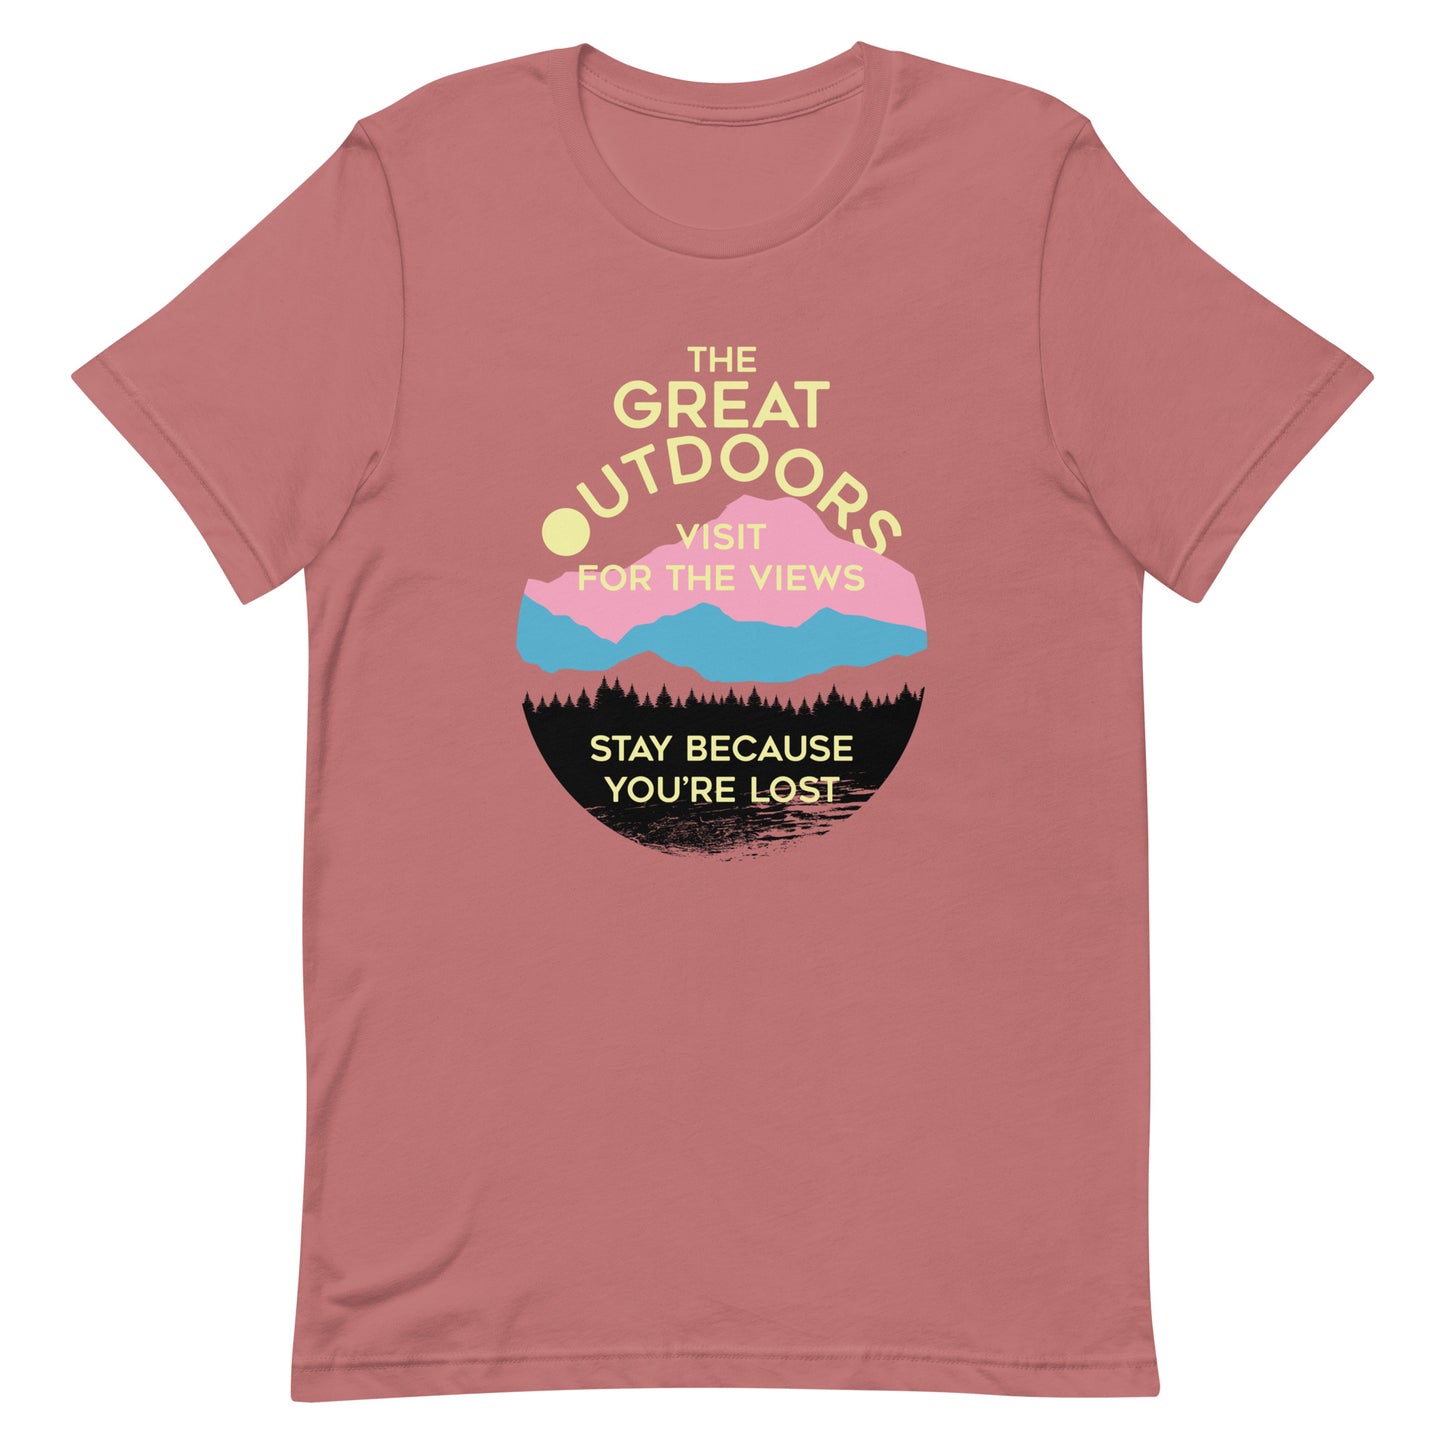 The Great Outdoors Men's Signature Tee